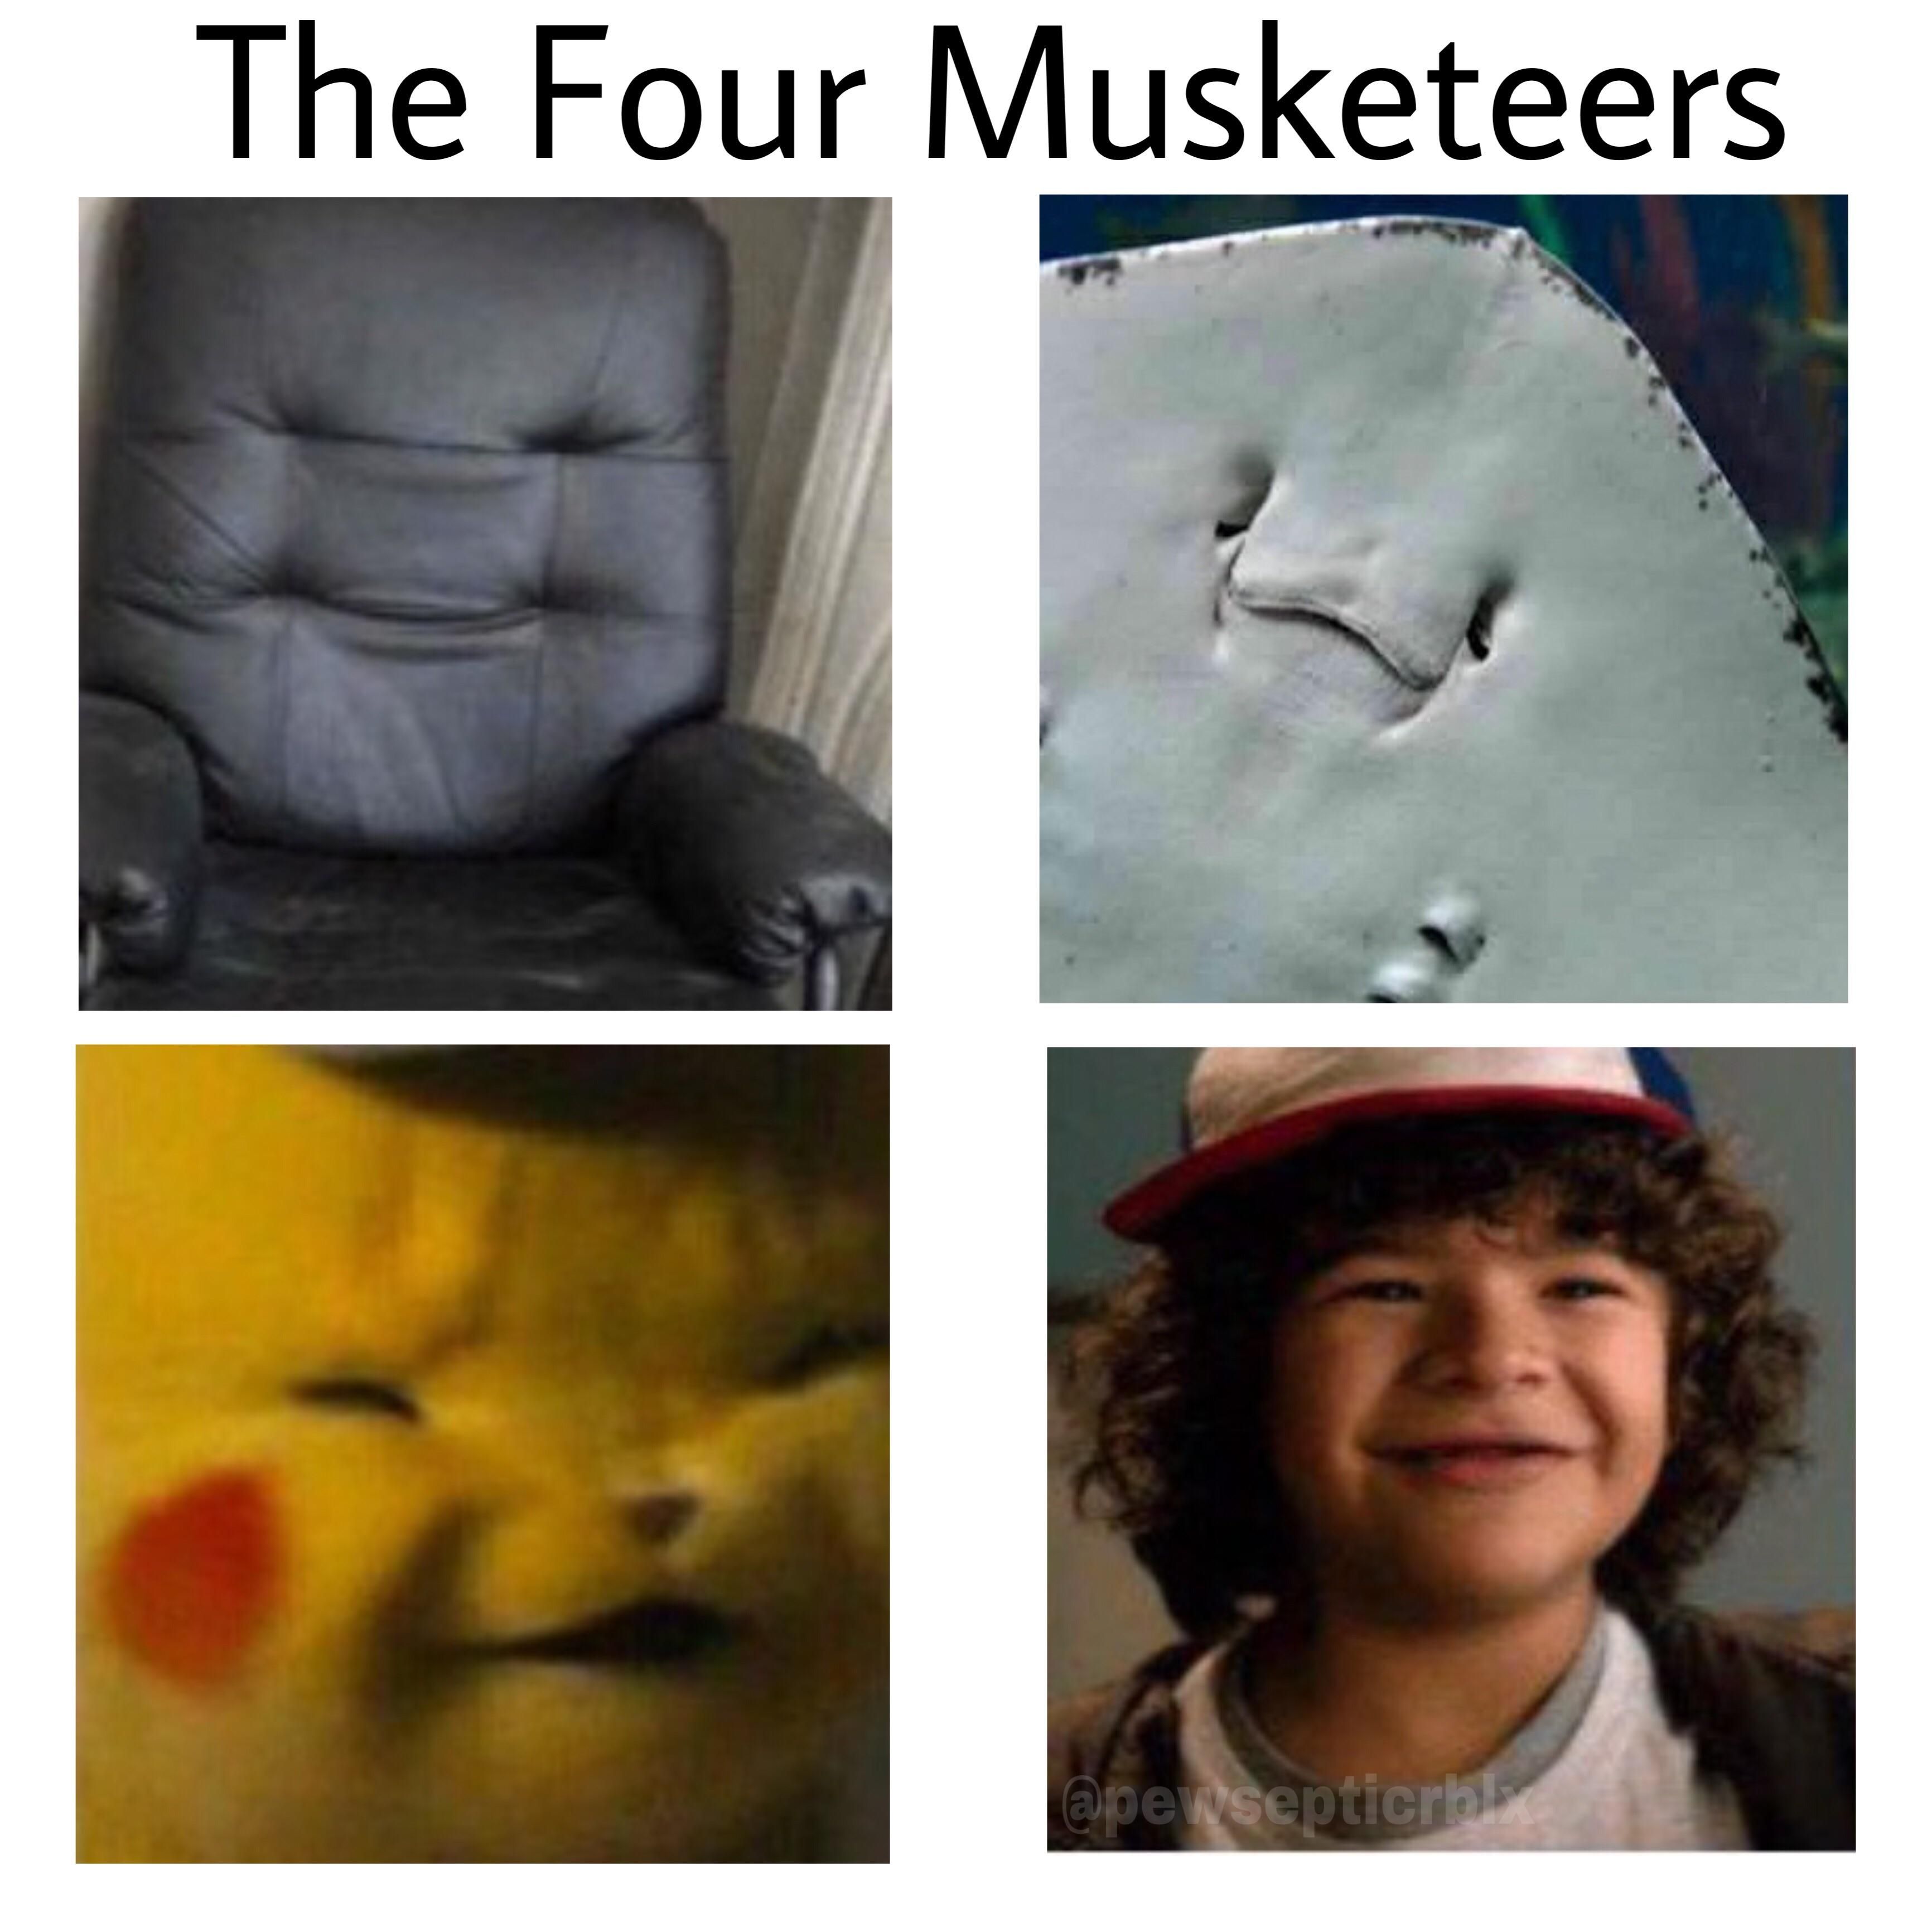 The four musketeers